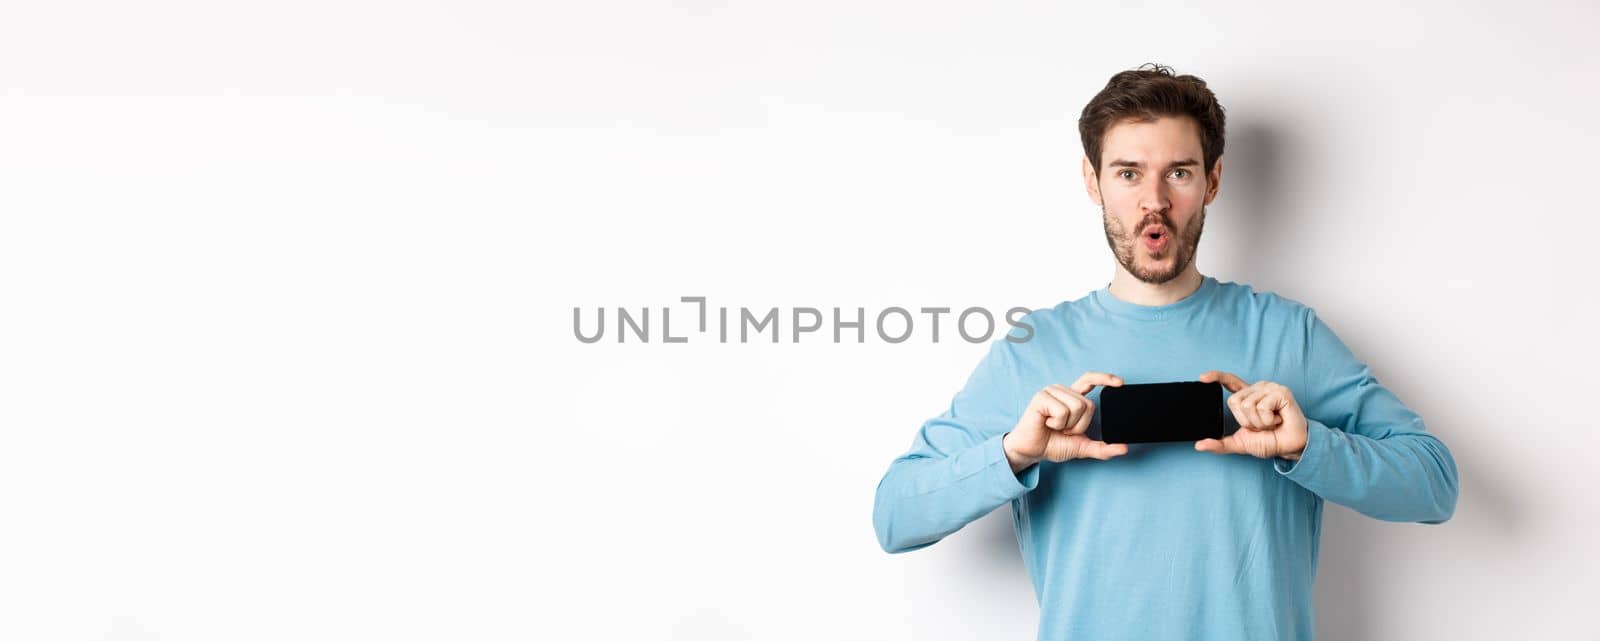 E-commerce and shopping concept. Image of impressed man saying wow and showing blank mobile phone screen in horizontal, standing over white background.